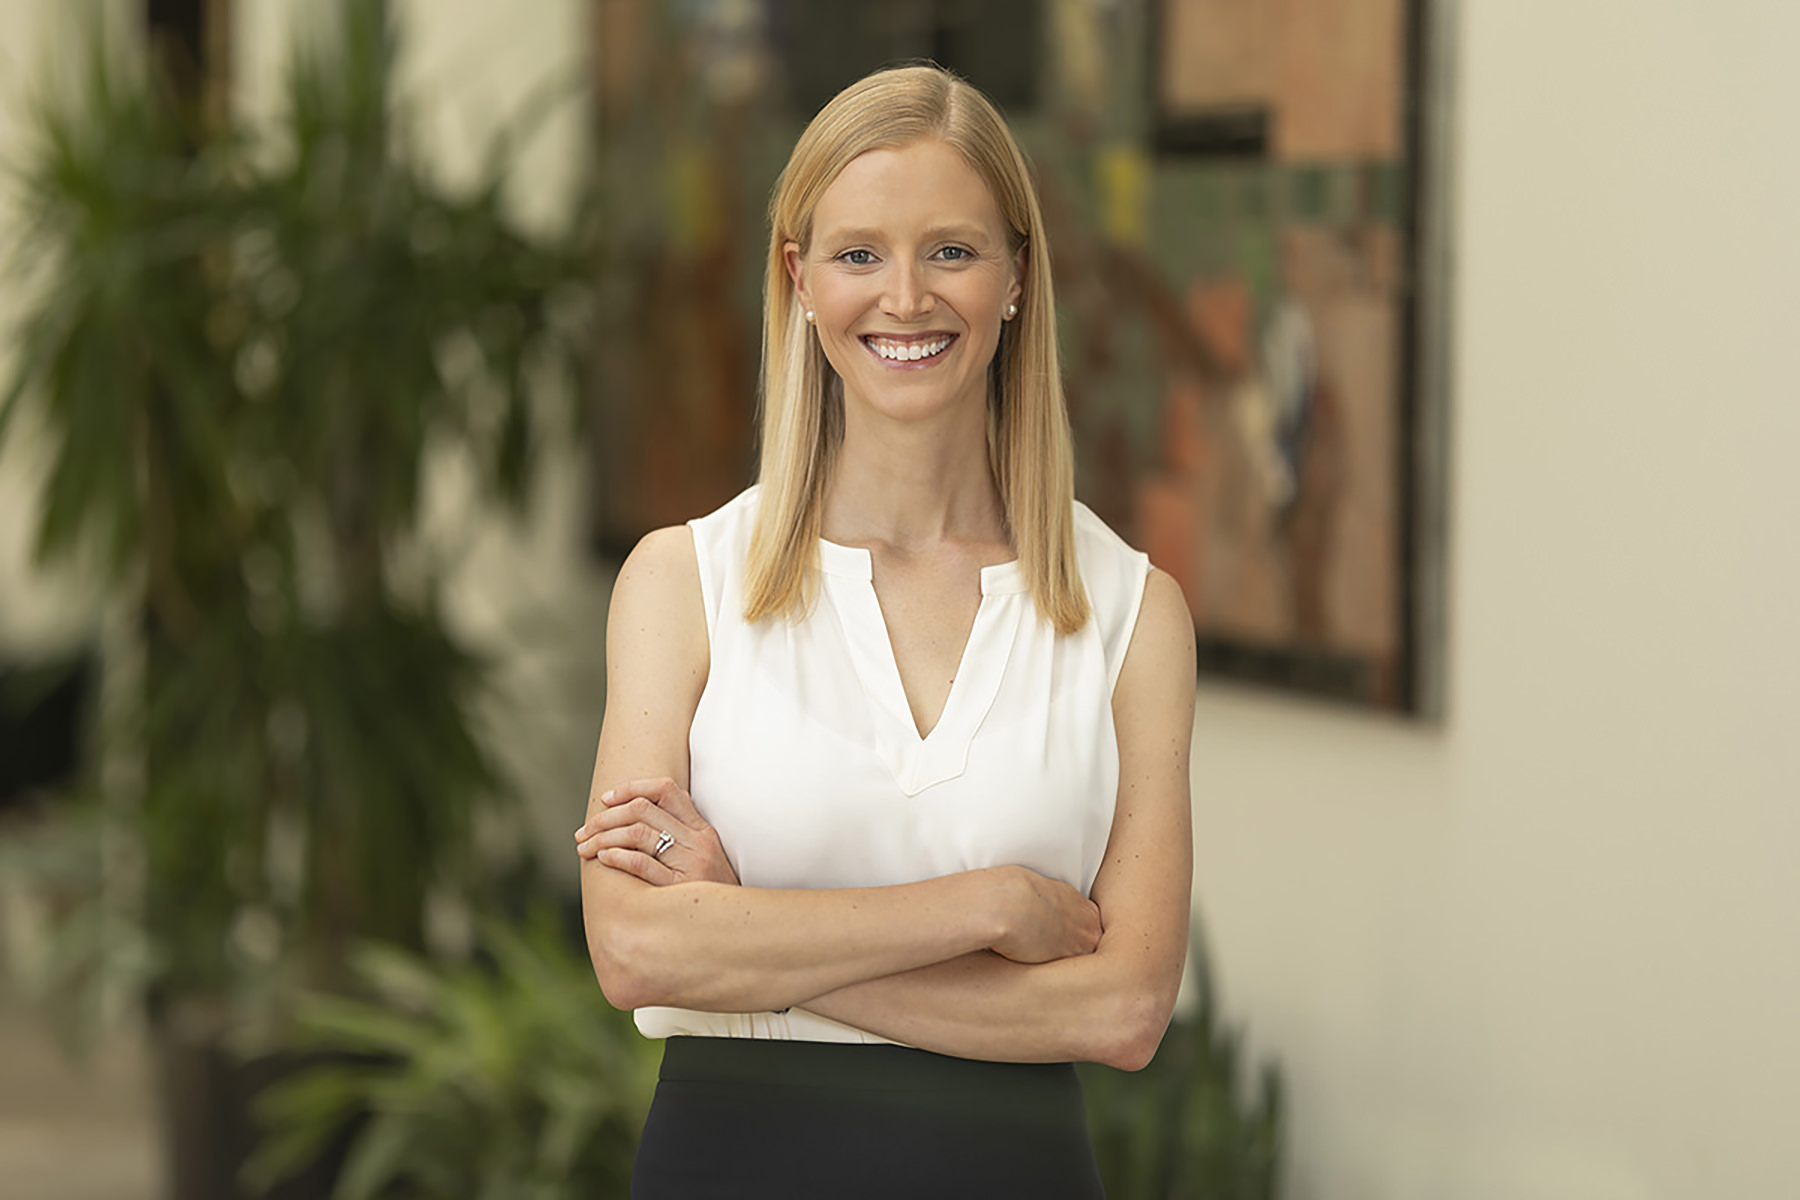 A smiling woman with blonde hair, wearing a white top and dark skirt, stands with her arms crossed in a well-lit indoor setting with paintings in the background, perfect for Denver headshots.